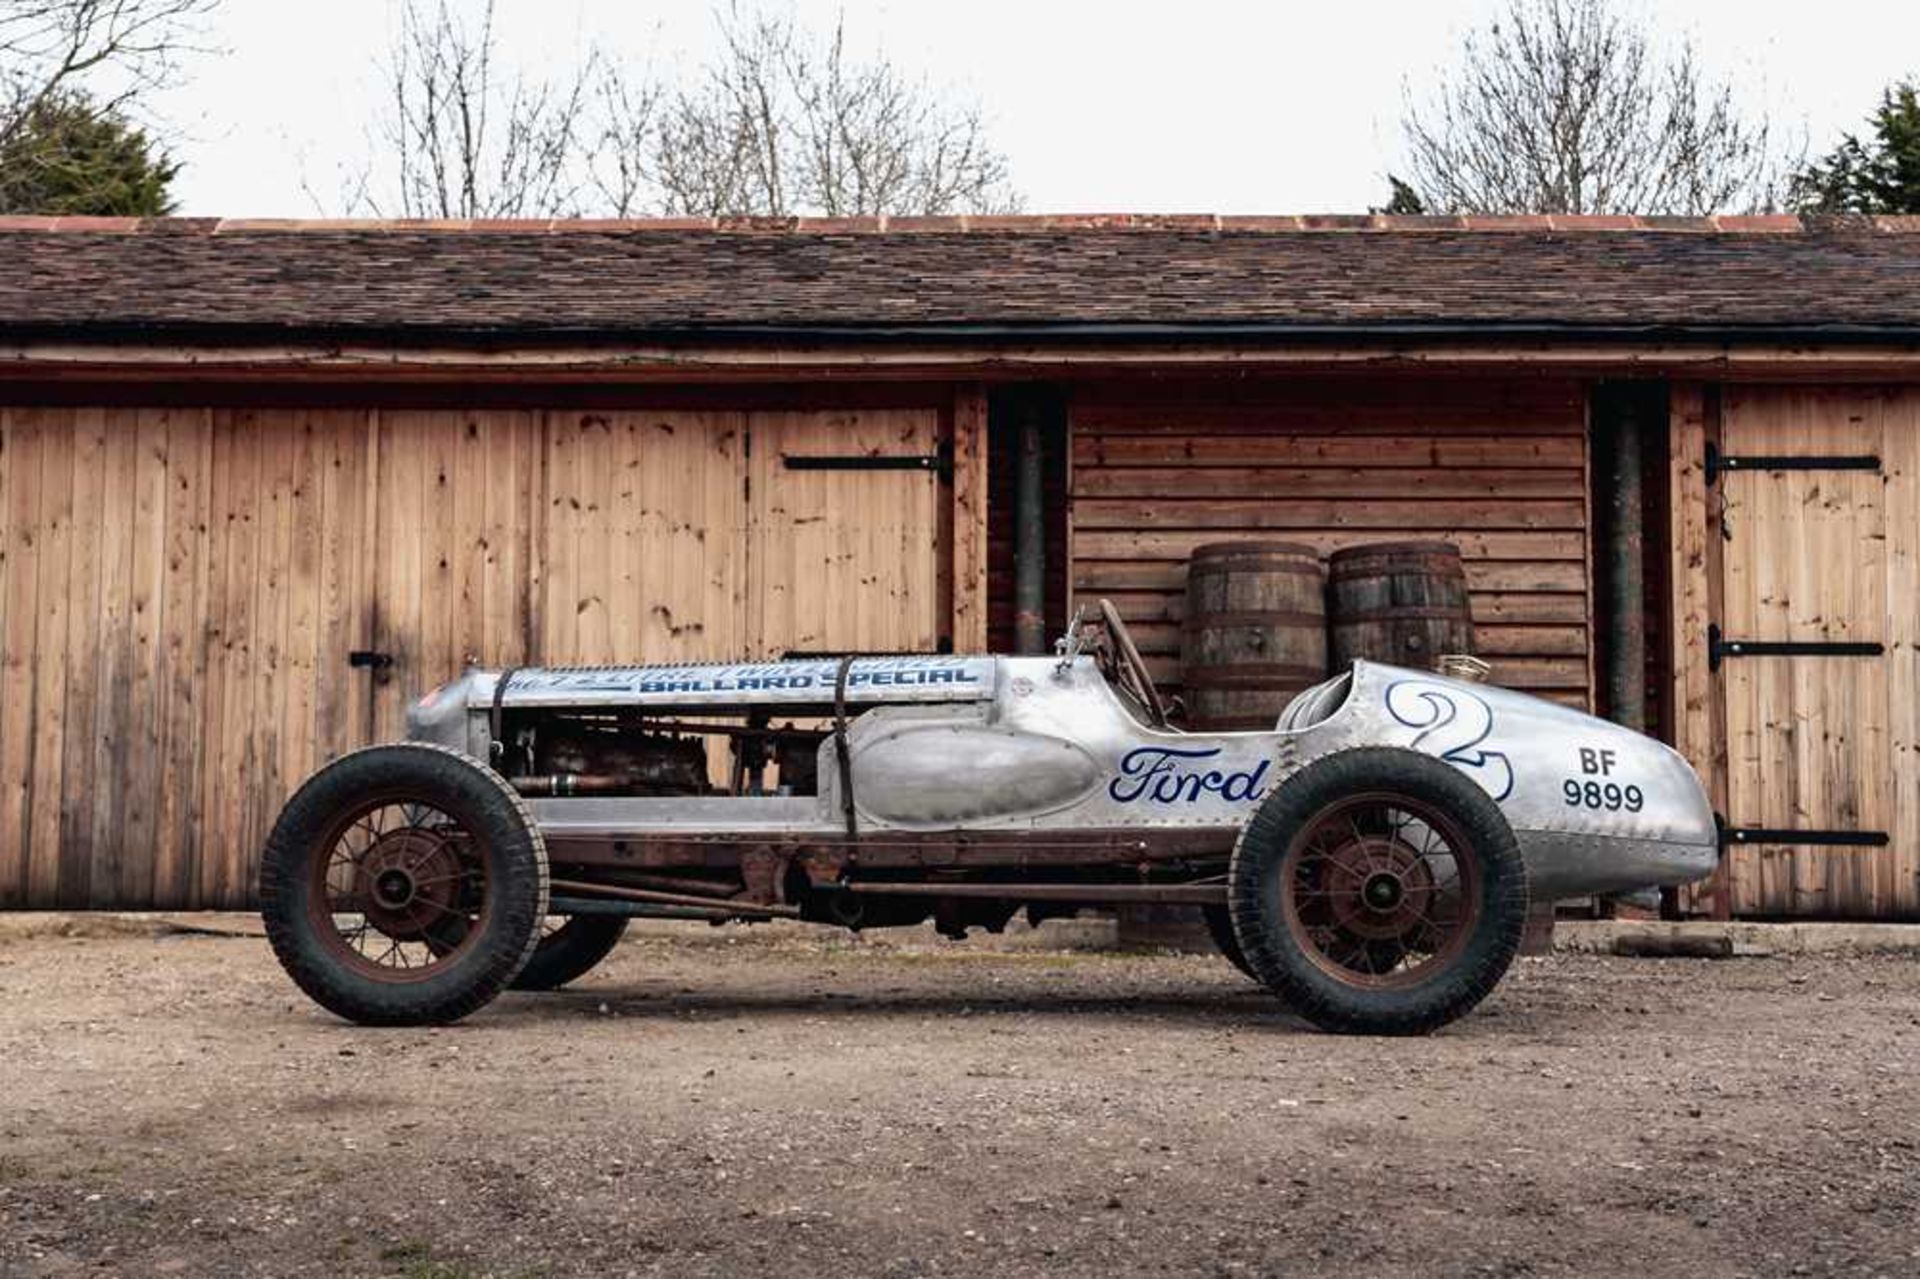 1930 Ford Model A "The Ballard Special" Speedster One off, bespoke built twin-engined pre-war racing - Image 93 of 94